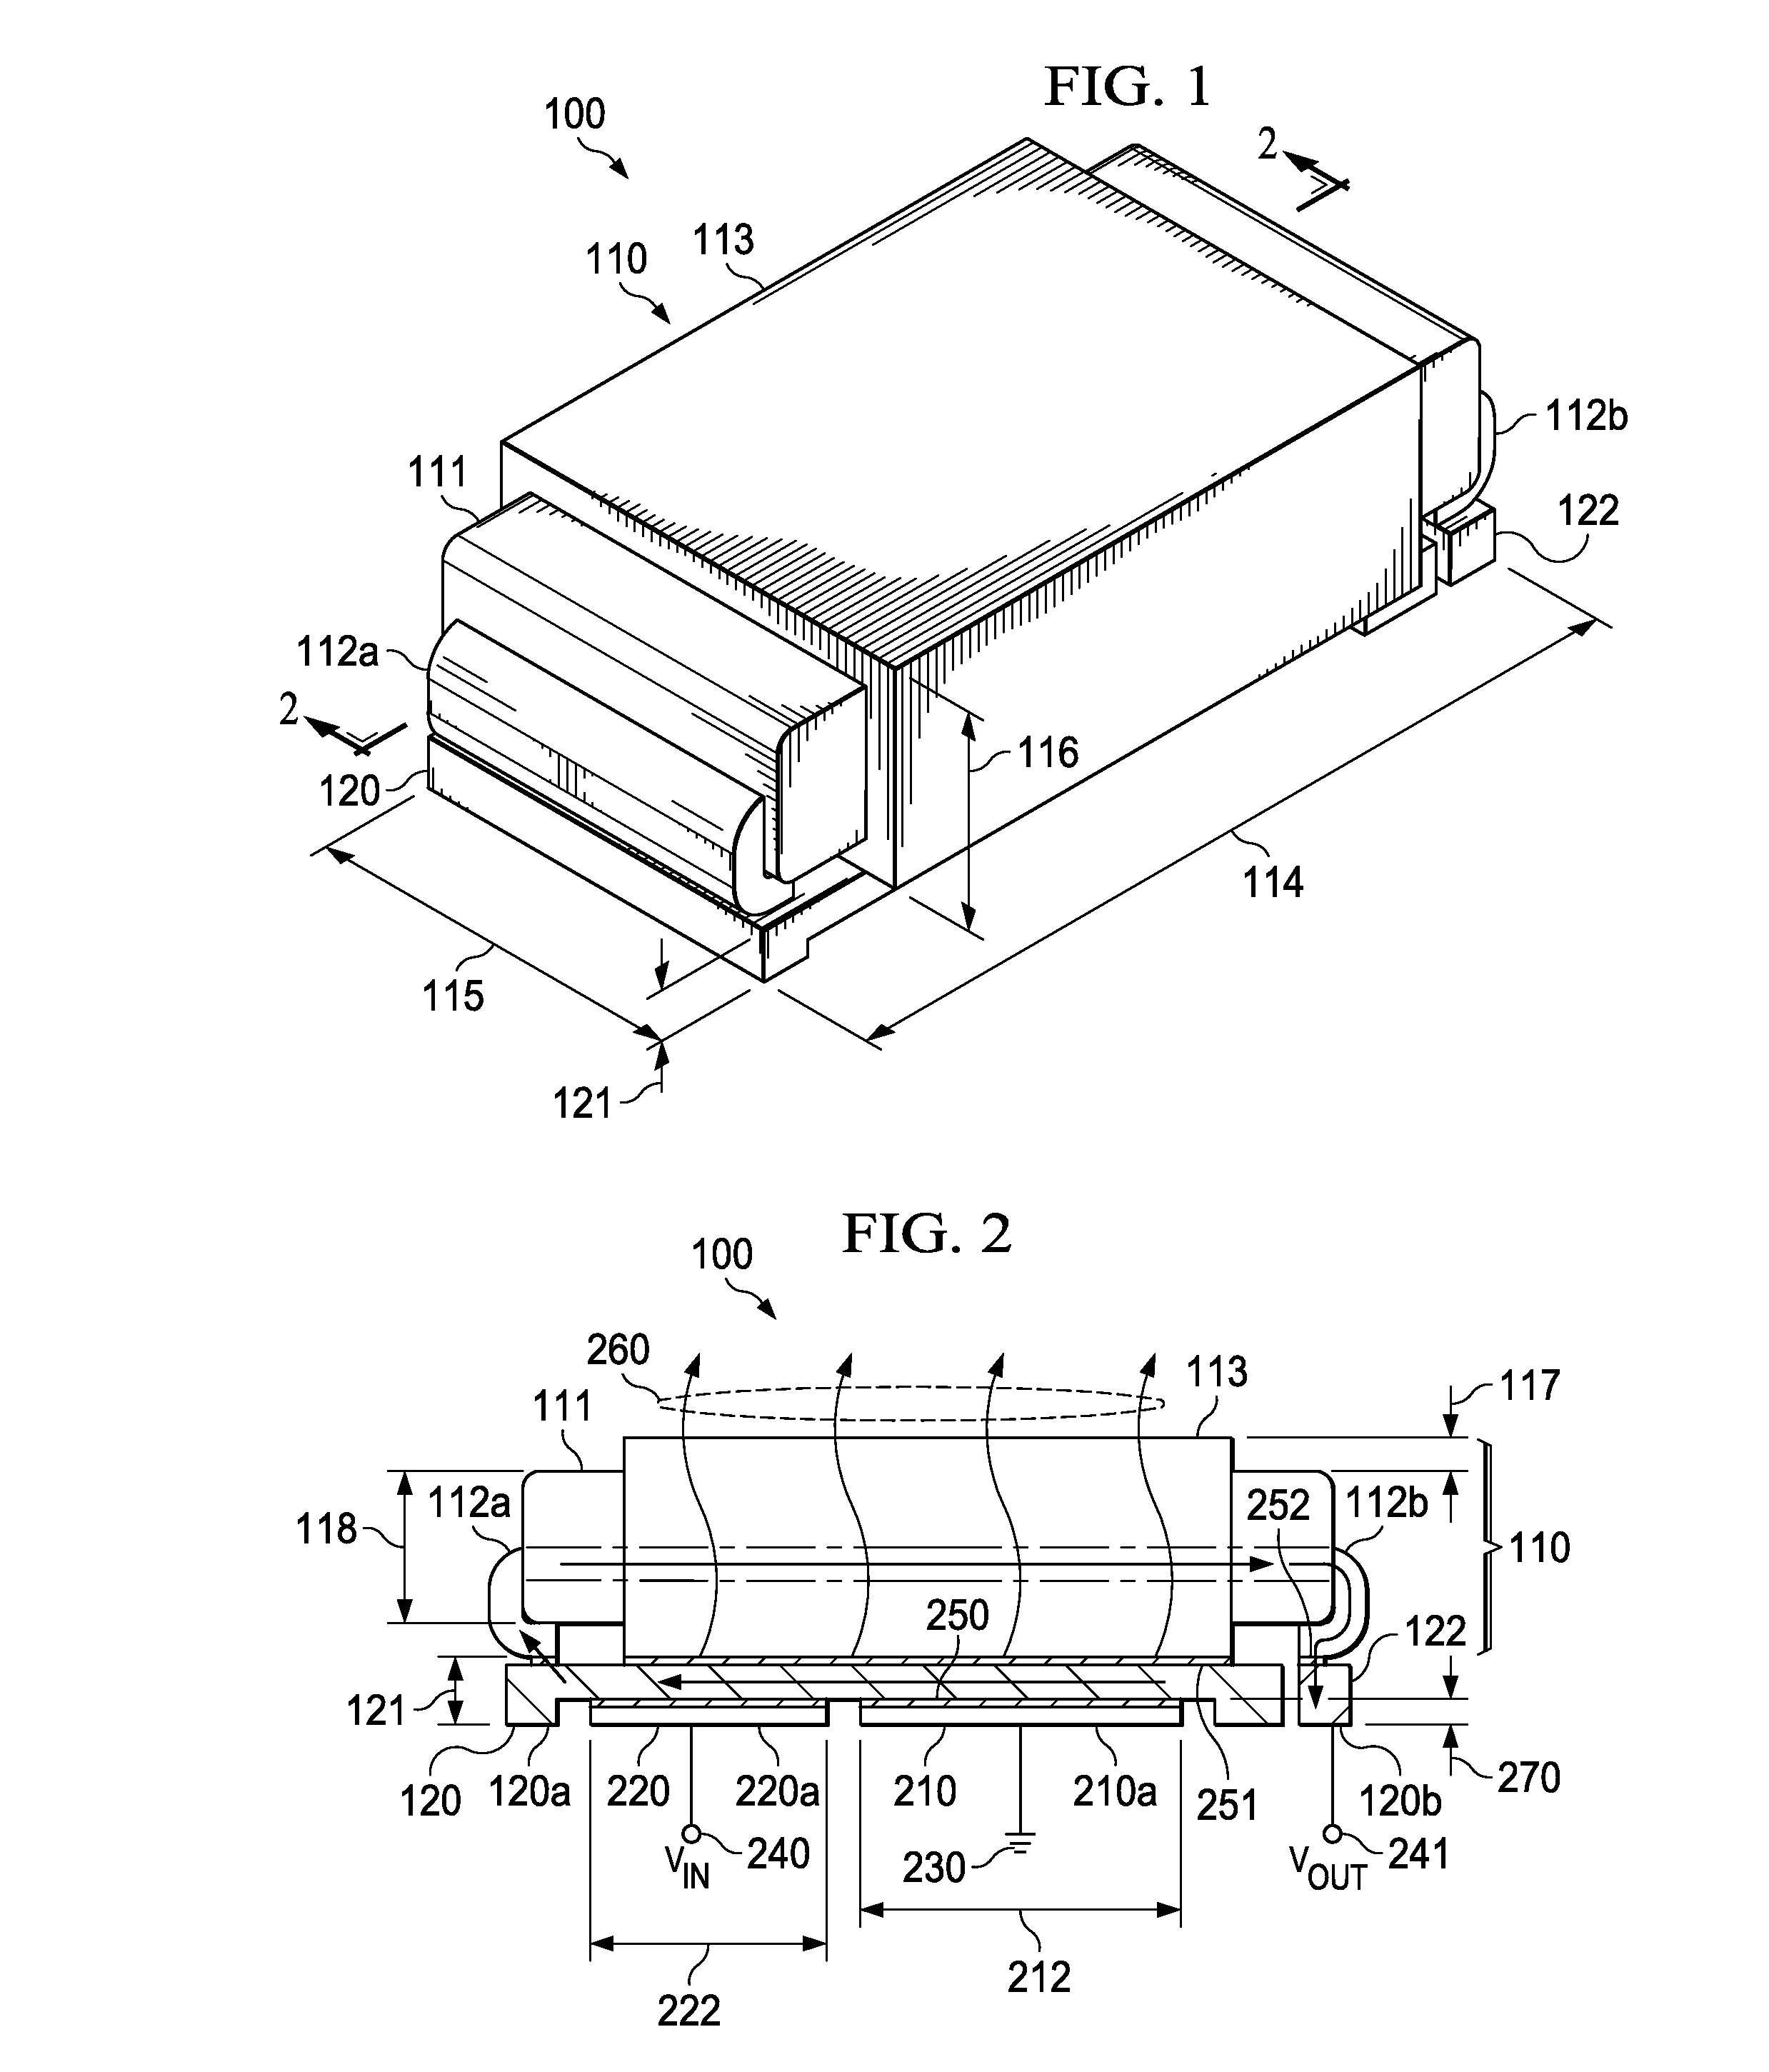 DC-DC Converter Vertically Integrated with Load Inductor Structured as Heat Sink